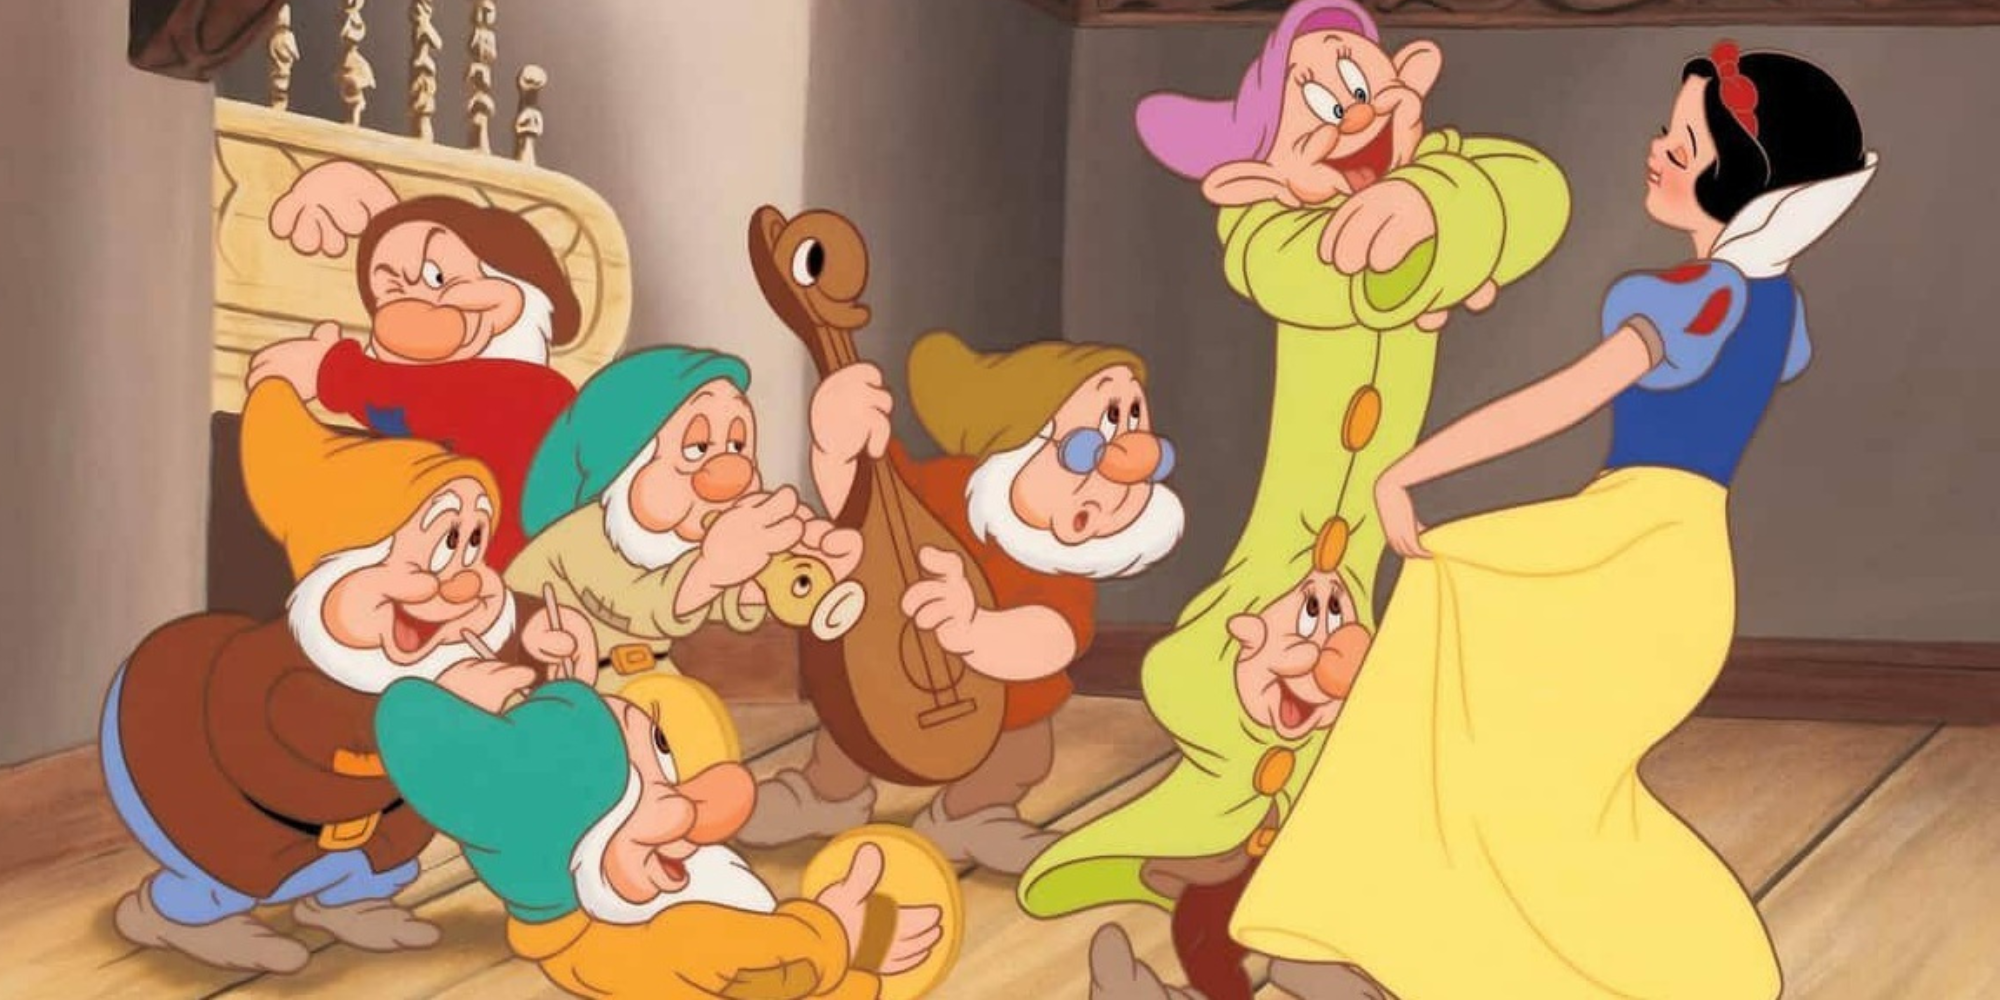 Snow White dancing with the seven dwarfs 